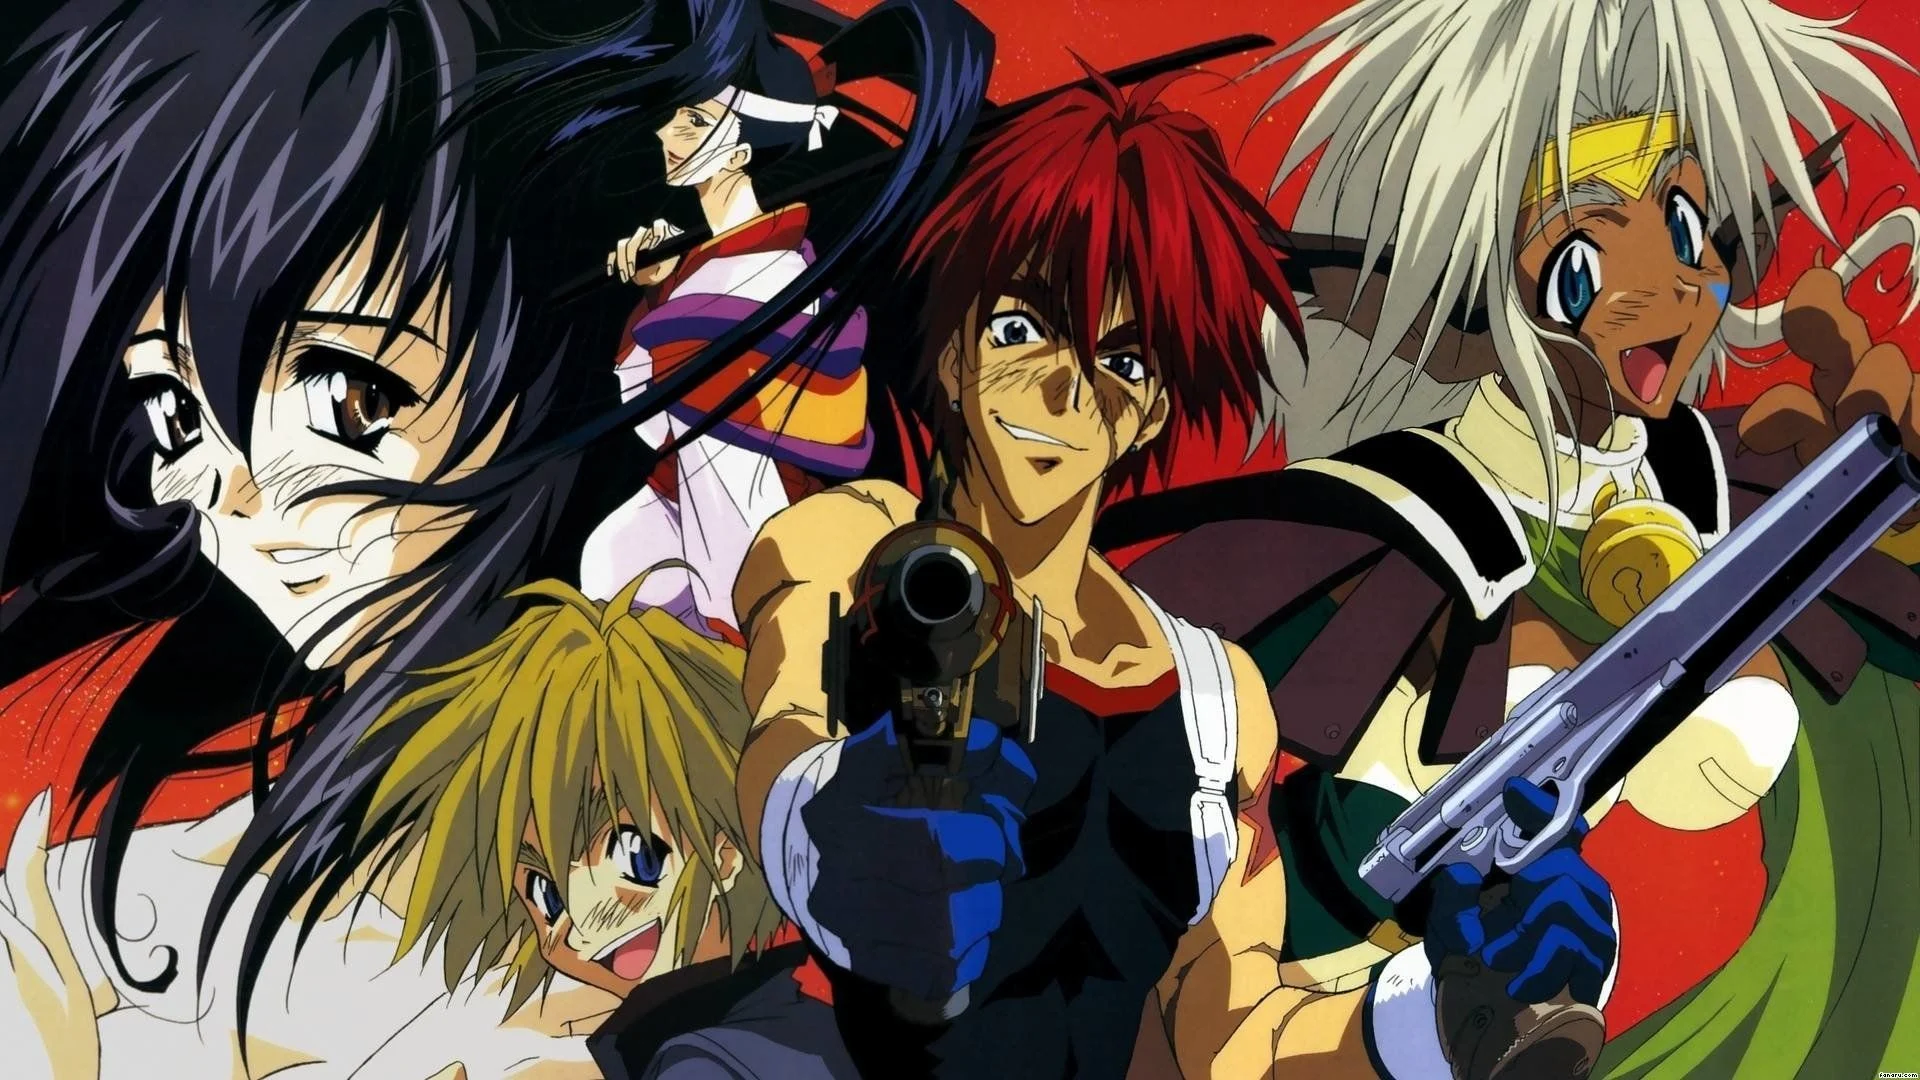 A still from Outlaw Star